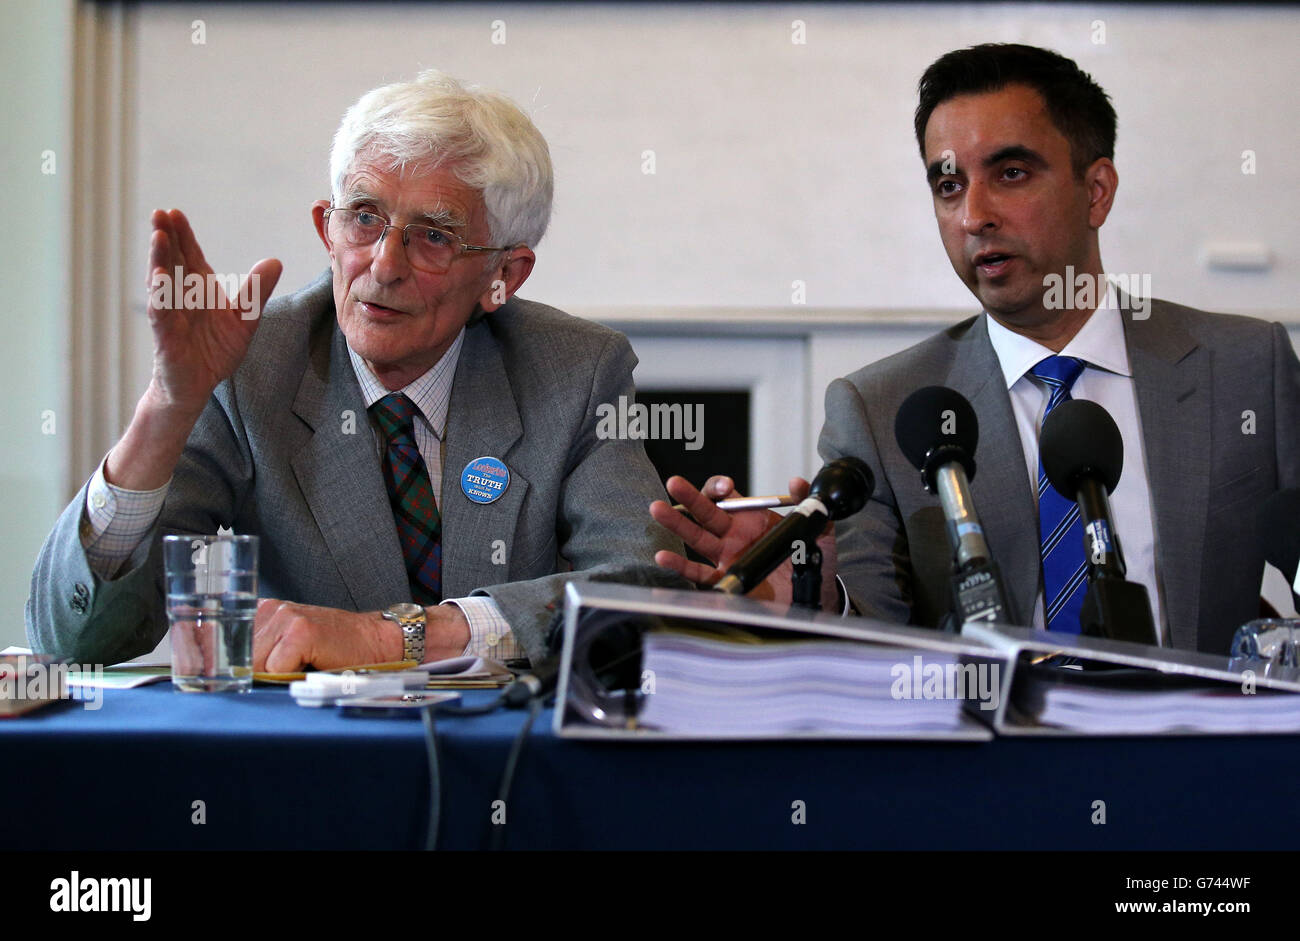 Dr Jim Swire (left), the father of Flora Swire who died in the bombing of Pan Am Flight 103 over Lockerbie in 1988, with solicitor Aamer Anwa (right) during a press conference at the Royal Faculty of Procurators in Glasgow as relatives of Abdelbaset al-Megrahi, the only man convicted of the Lockerbie bombing, are to pursue a fresh bid to clear his name more than two years after his death. Stock Photo